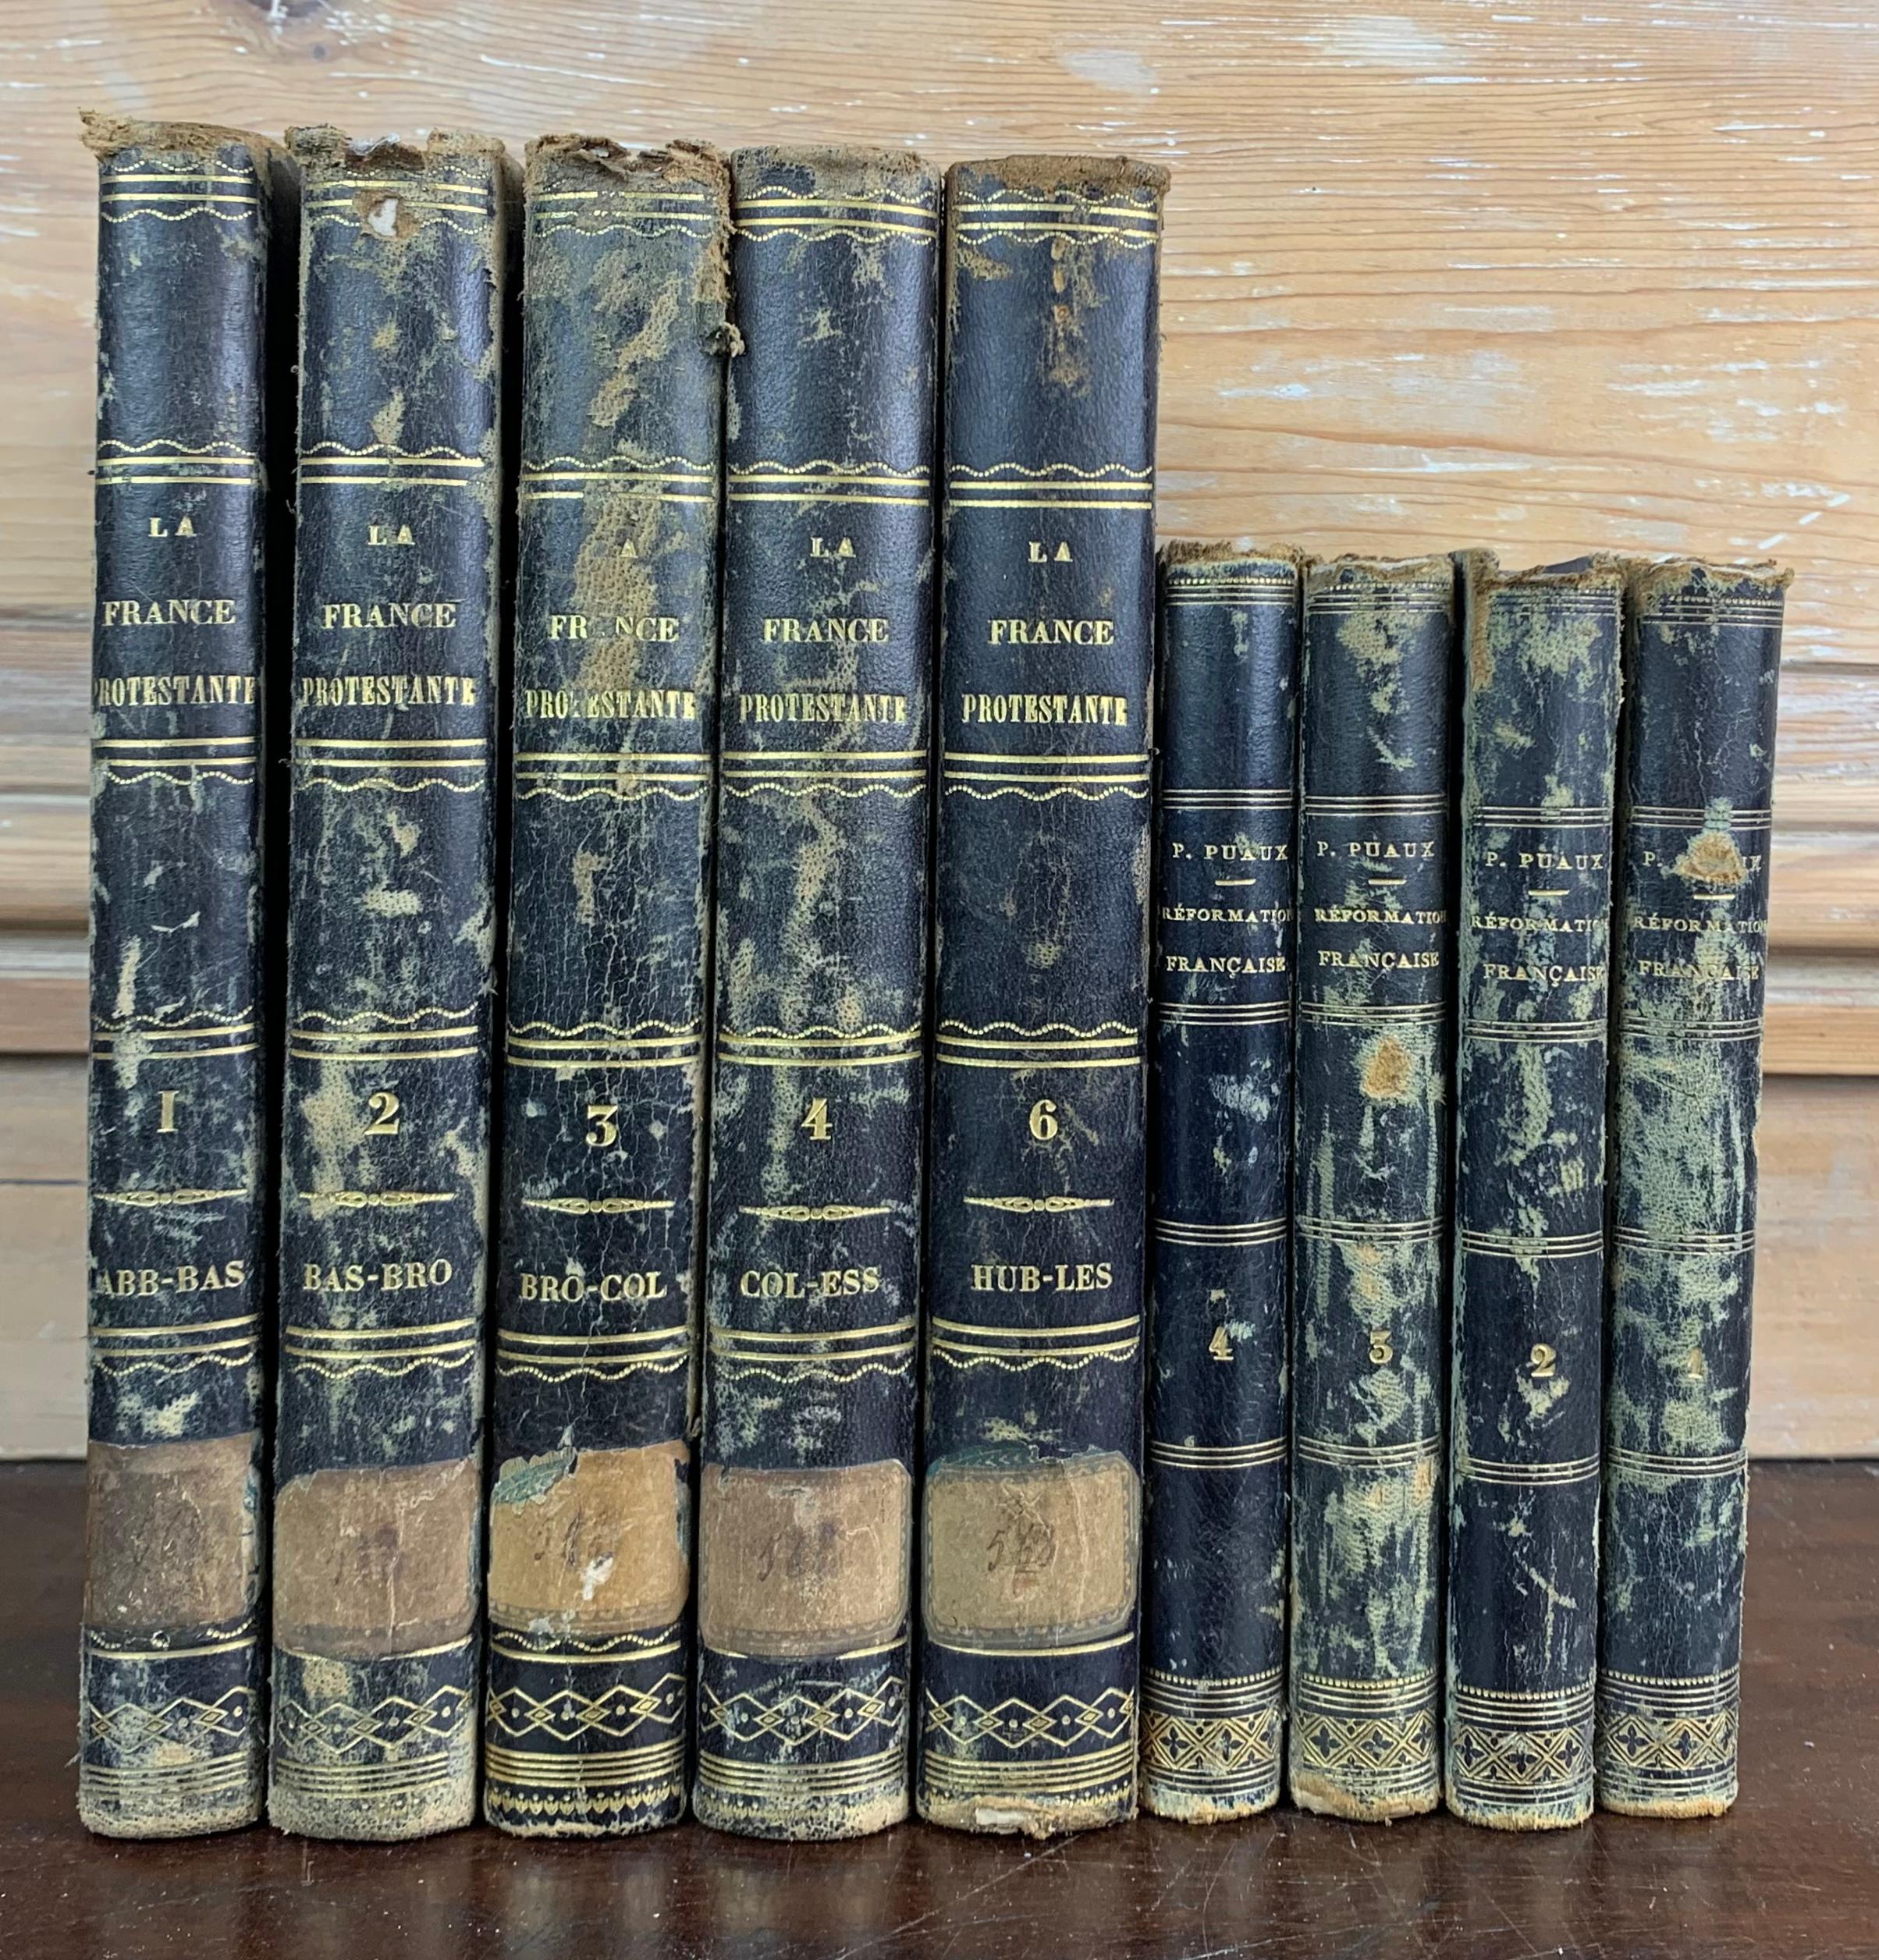 Set of old religious books dating from the 19th century. From an old protestant library near Le Havre in France. These books are entitled « La France Protestante » (Protestant France) et « Réforme Française » (French Reform). These beautiful books